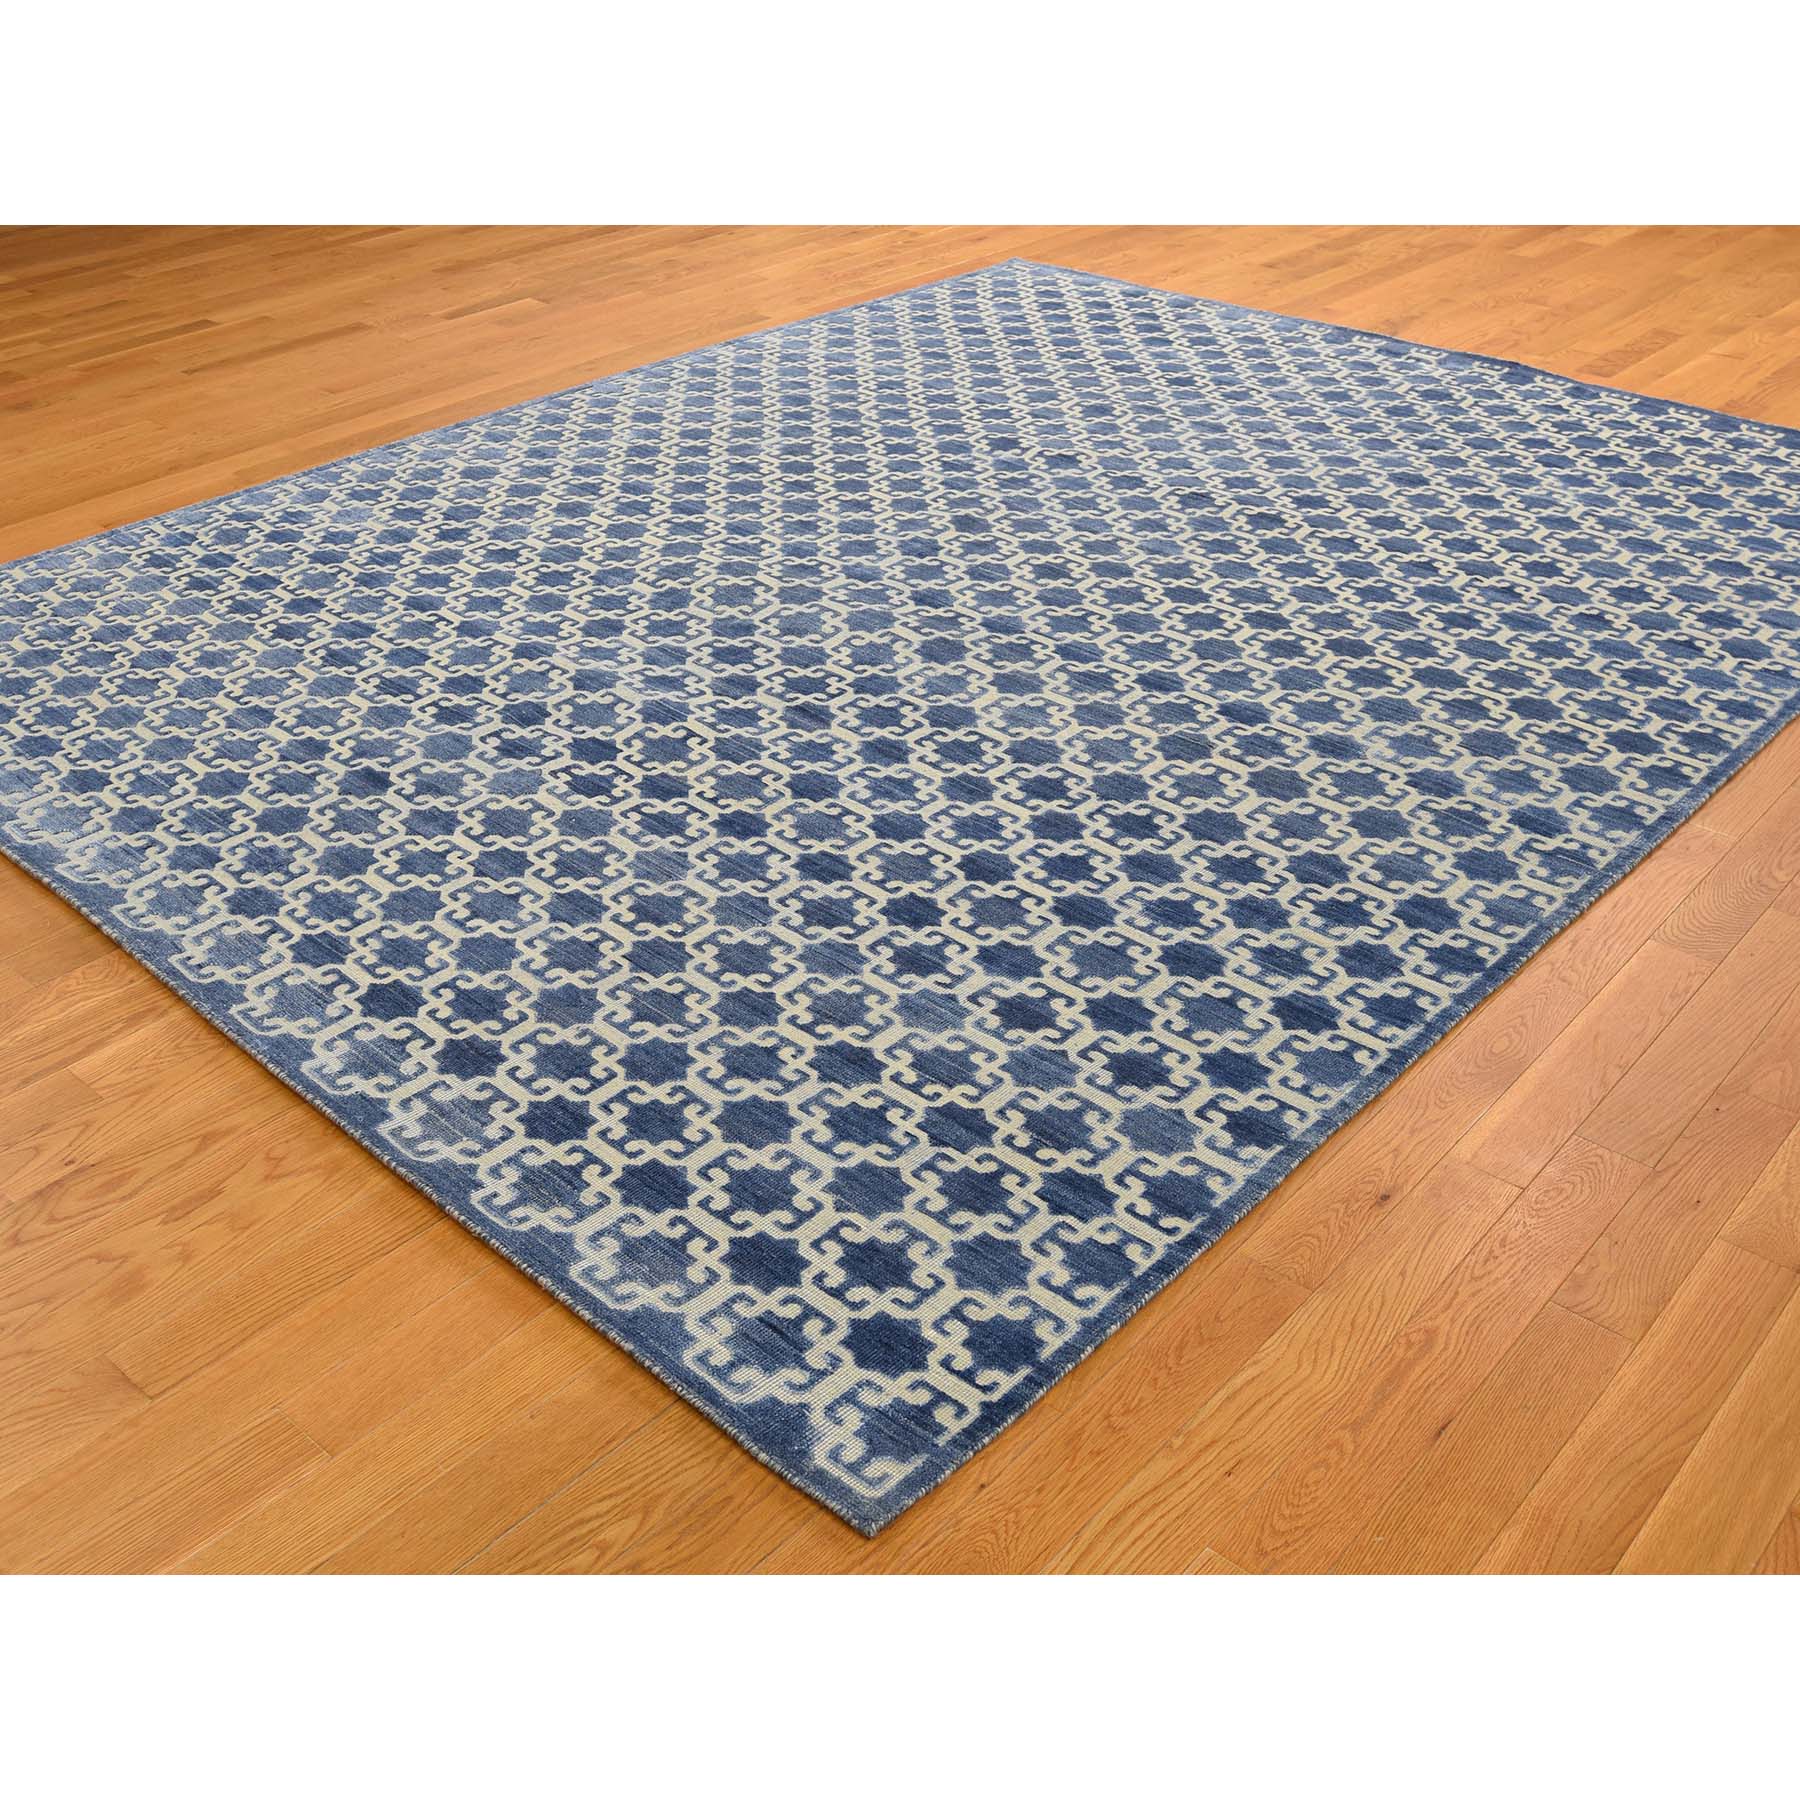 8-1 x10- Wool And Silk Star Design Hand-Knotted Oriental Rug 